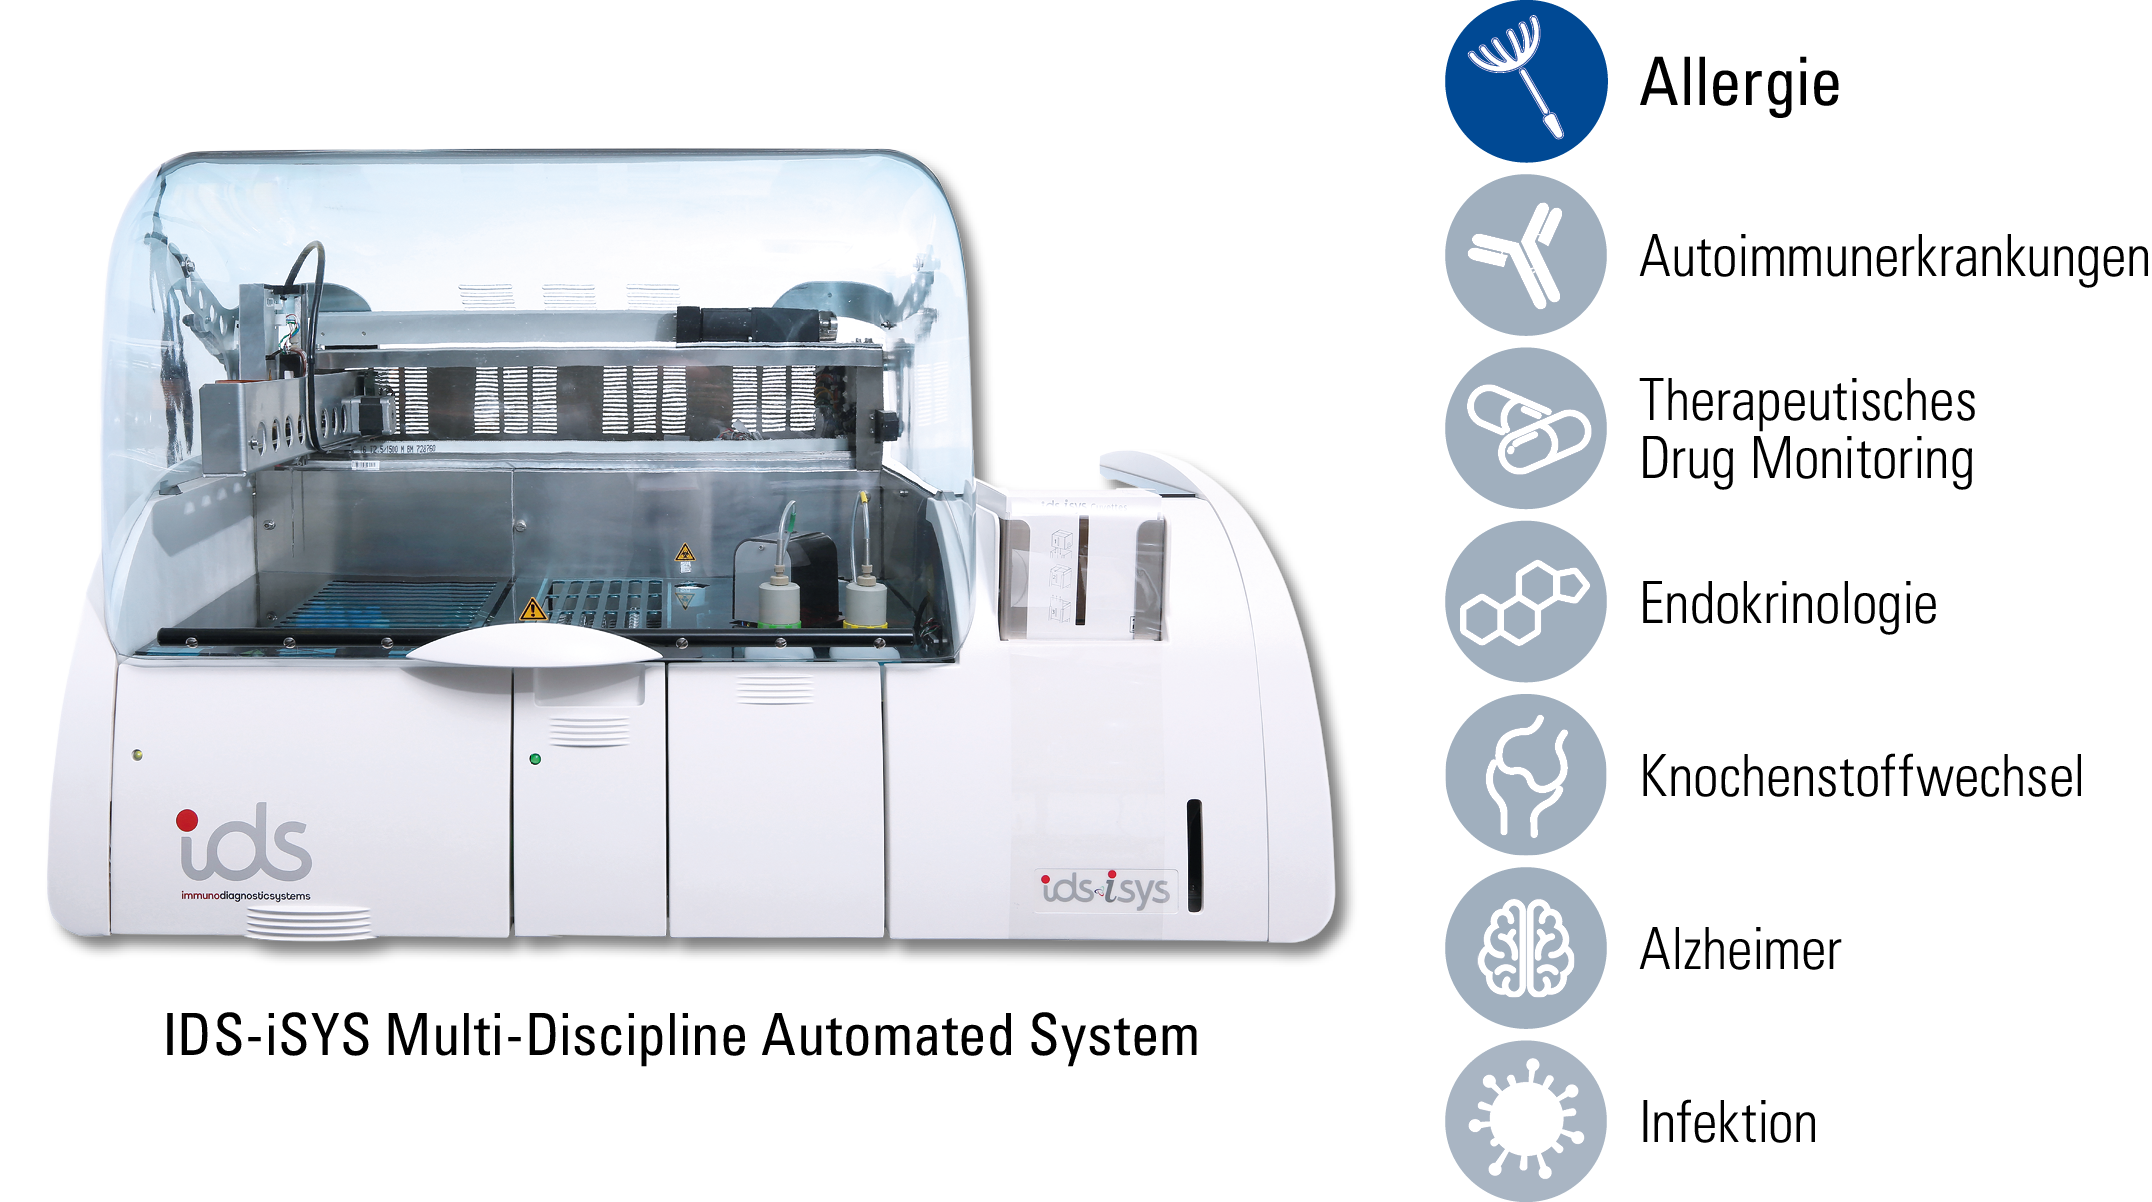 IDS-iSYS Multi-Discipline Automated System